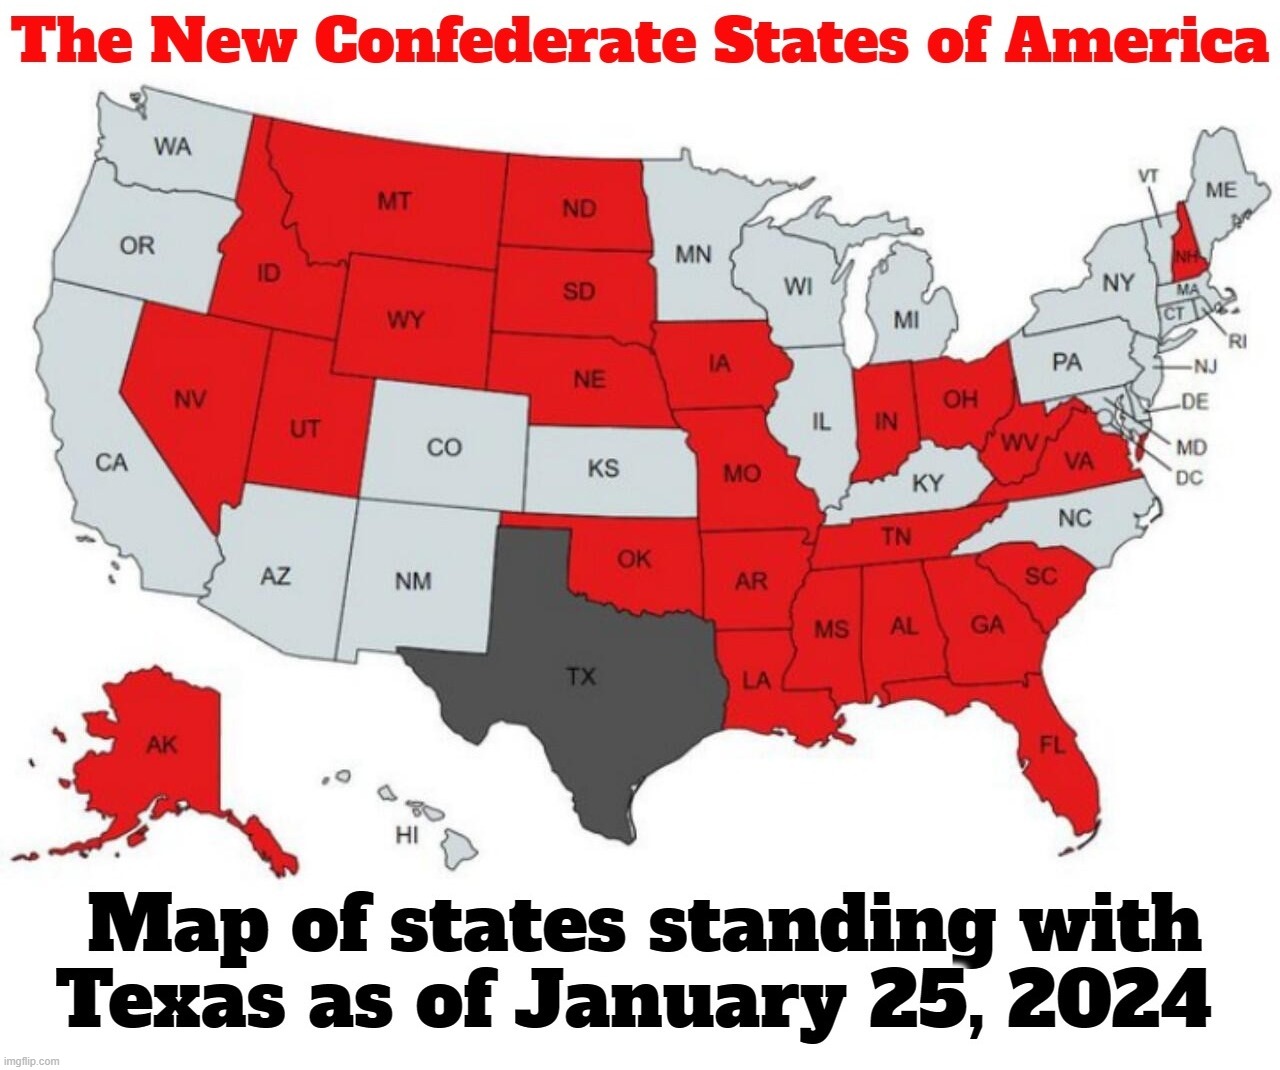 The New Confederacy as of January 25, 2024 | image tagged in confederacy,confederate,confederate states of america,song of the south,freedom rising,national security | made w/ Imgflip meme maker